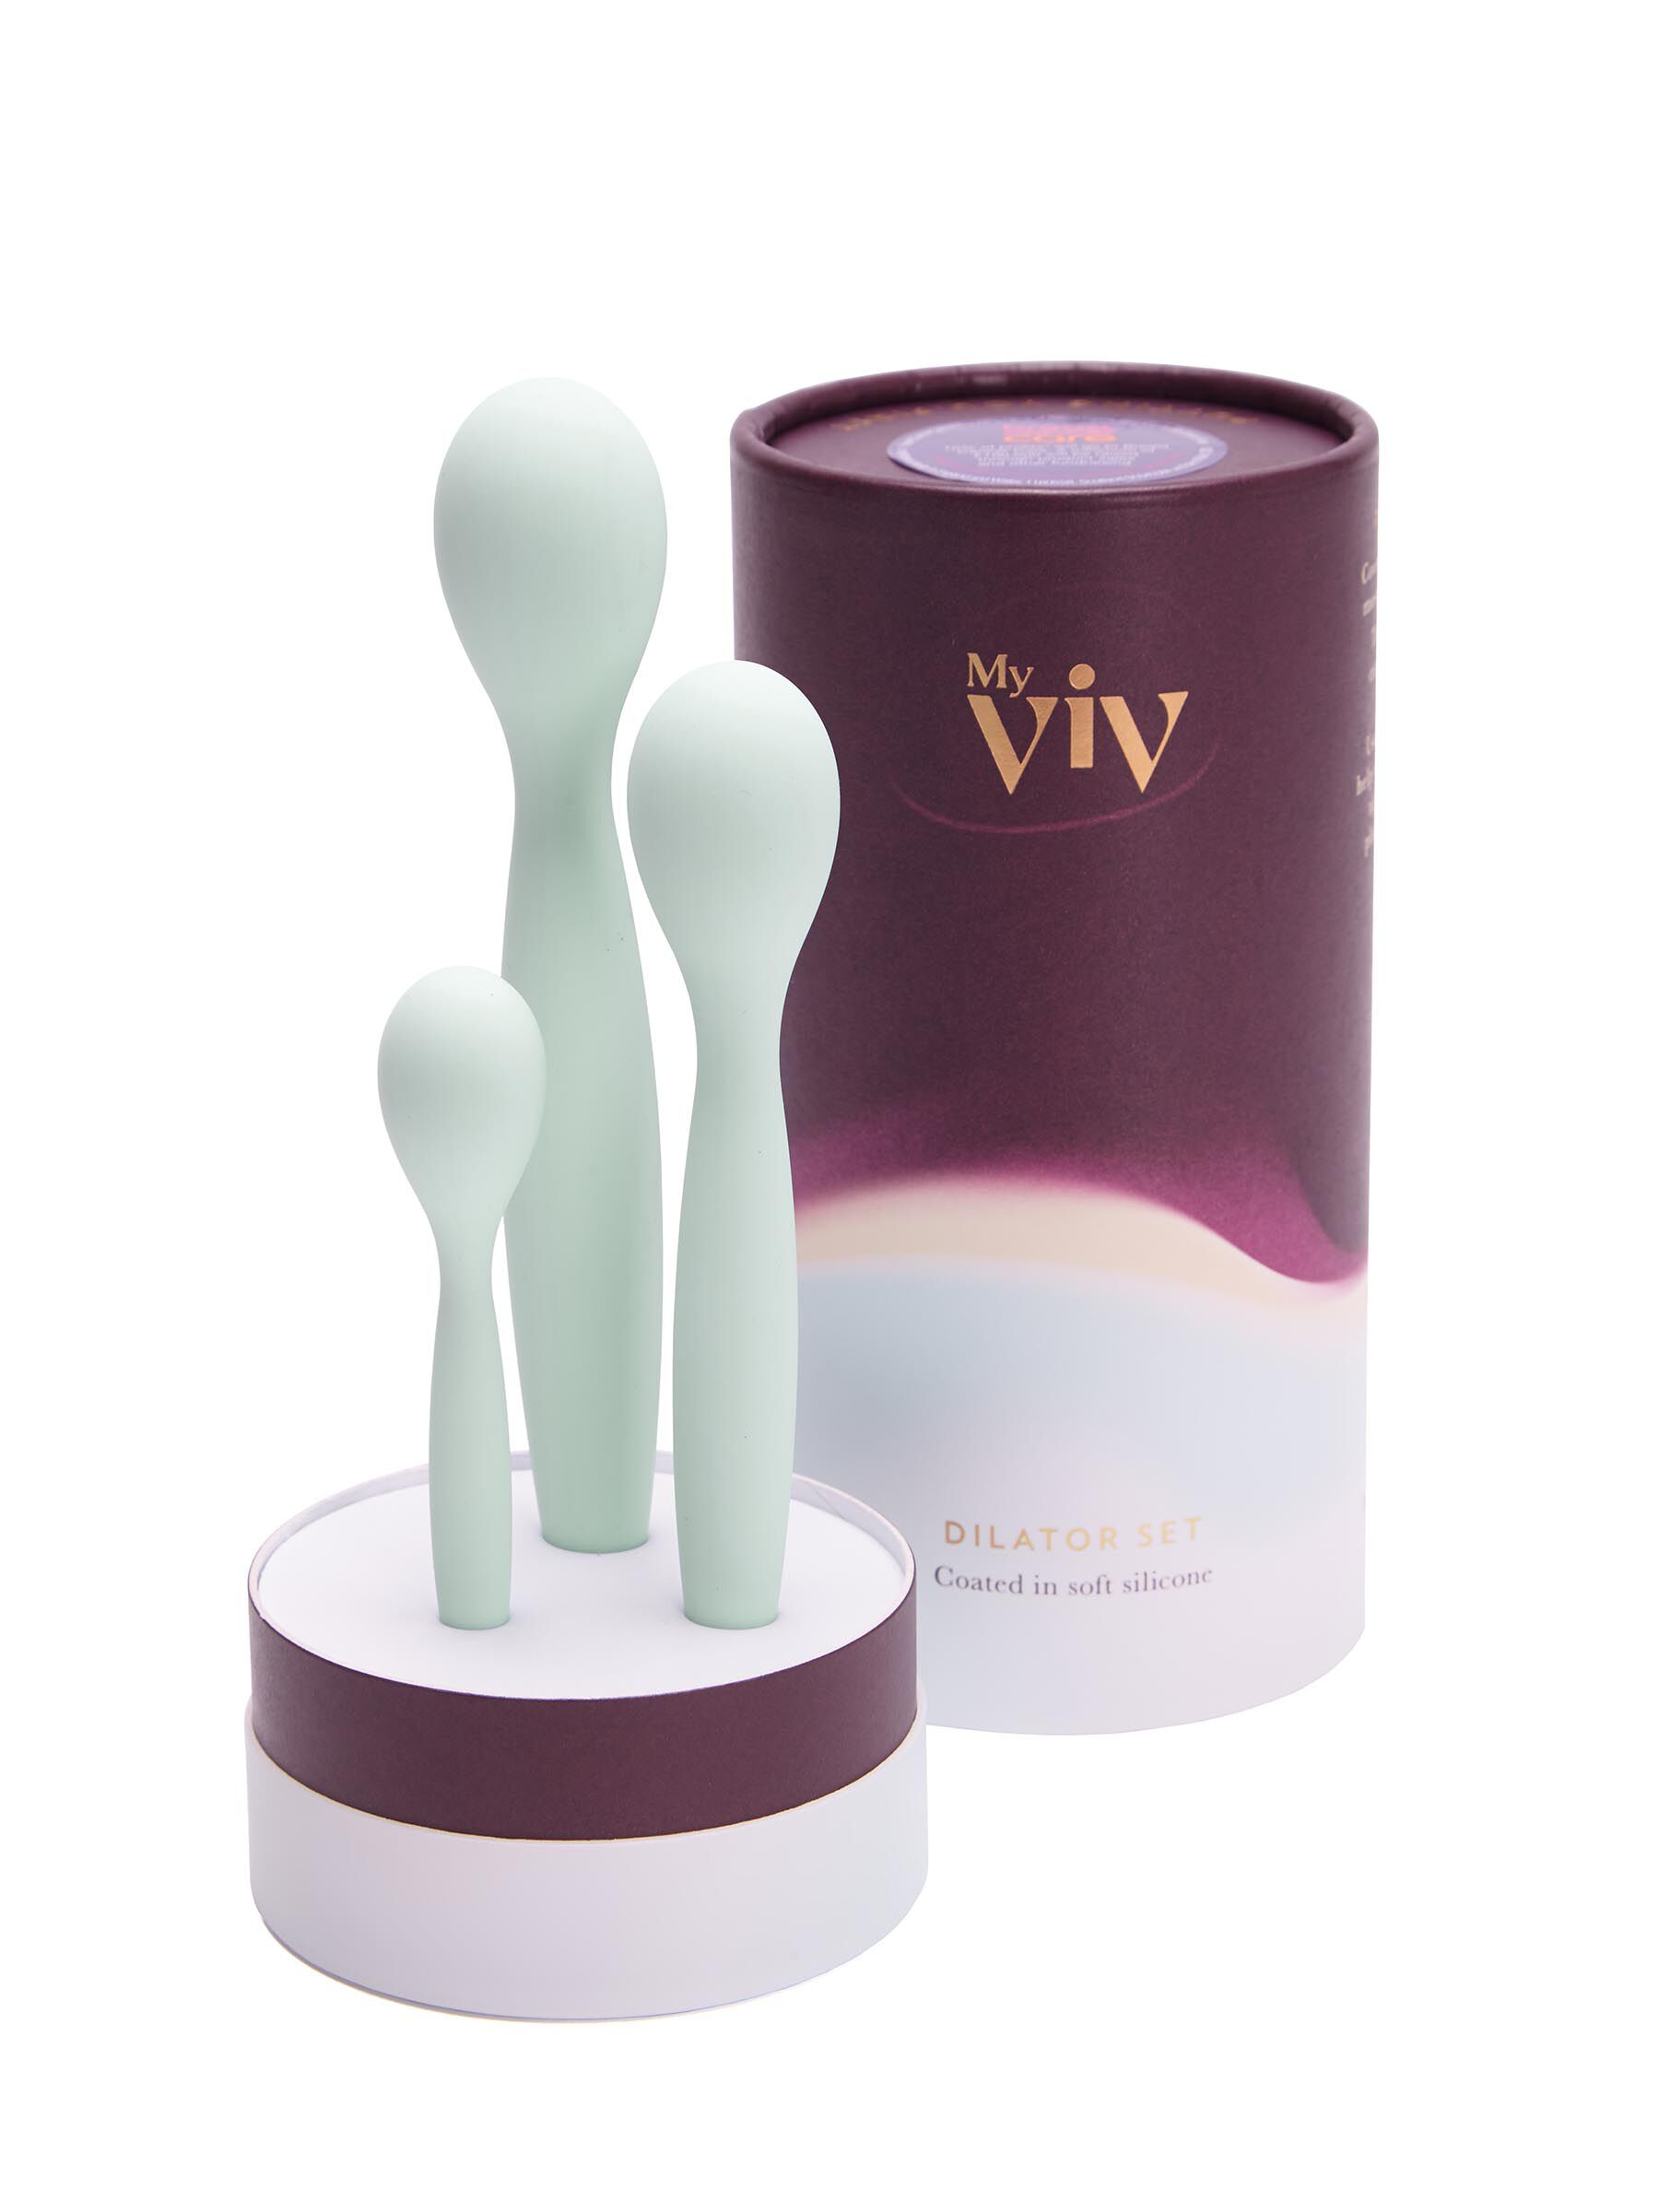 Made with body-safe silicone, this three-piece My Viv Dilator Set is ergonomically designed for comfortable insertion to address vagina tightness. Use the set progressively, starting with the smallest dilator first. Apply a My Viv lubricant directly on to the dilator before slowly placing the tapered end inside the vagina, and keeping it in place for up to 15 minutes. When ready, you can try the next size up.